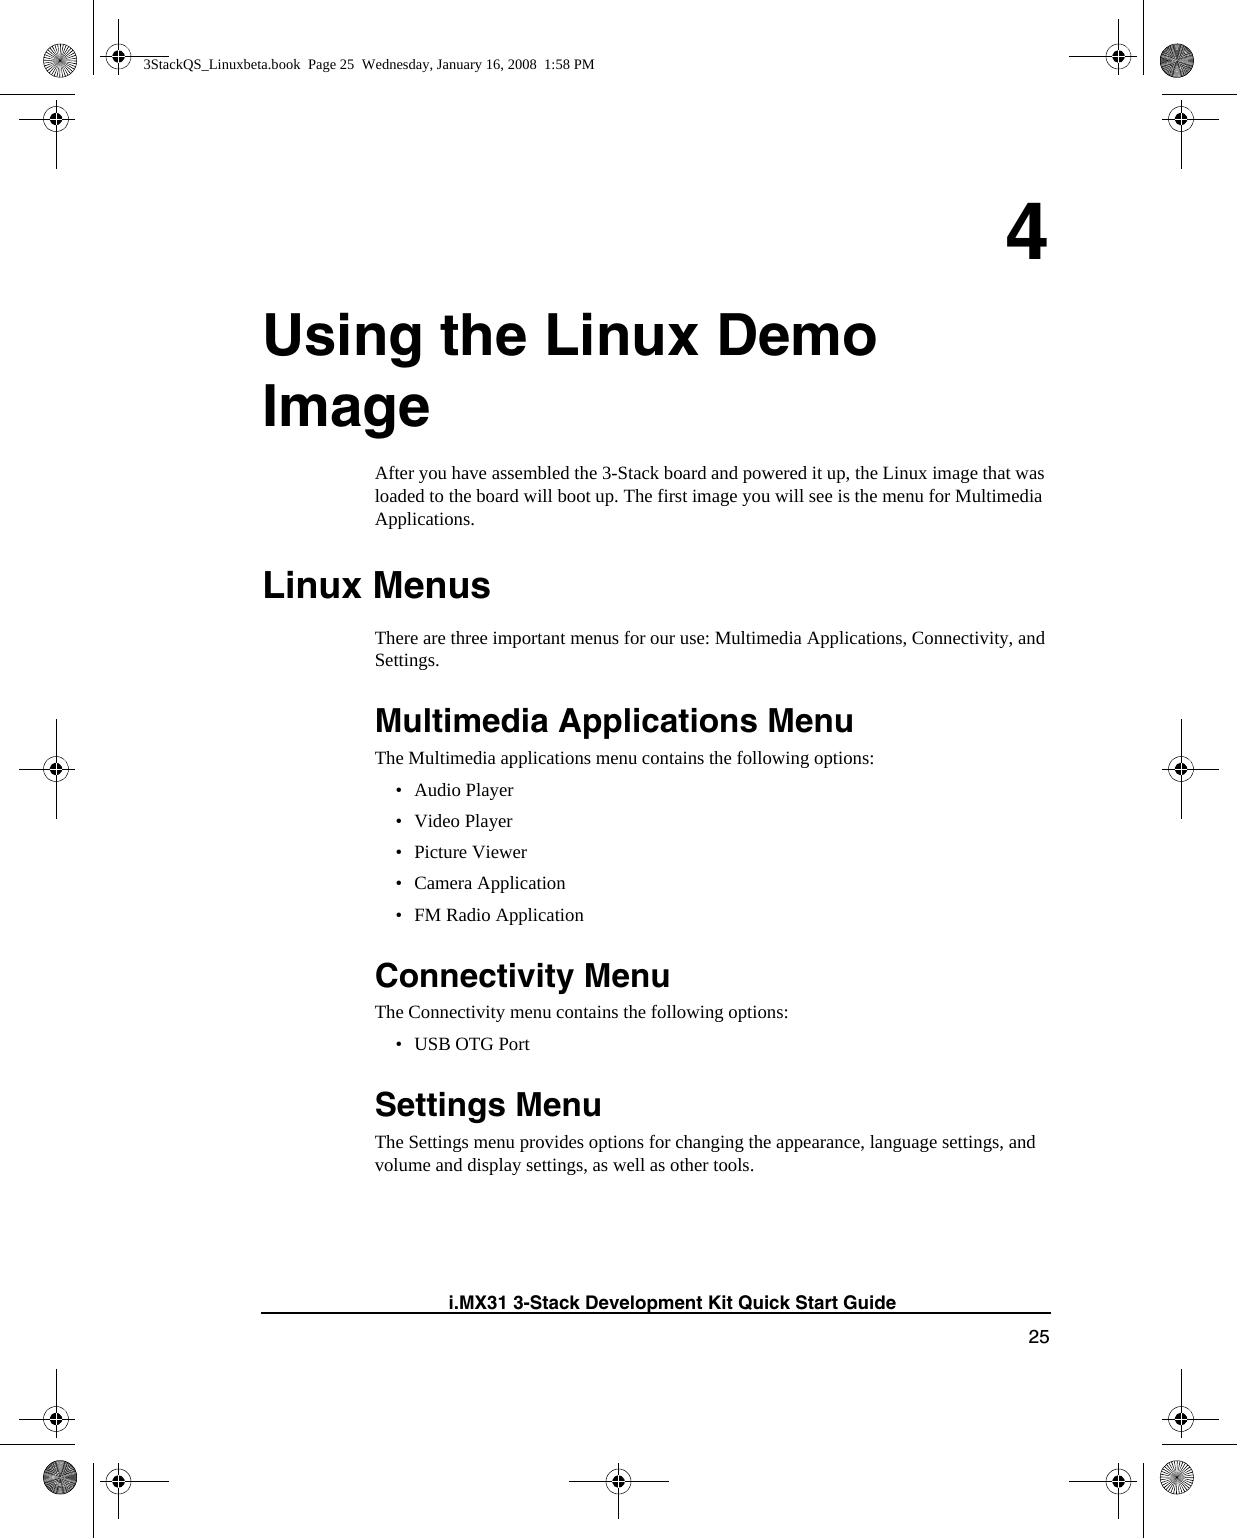 25i.MX31 3-Stack Development Kit Quick Start Guide4Using the Linux Demo ImageAfter you have assembled the 3-Stack board and powered it up, the Linux image that was loaded to the board will boot up. The first image you will see is the menu for Multimedia Applications.Linux MenusThere are three important menus for our use: Multimedia Applications, Connectivity, and Settings.Multimedia Applications MenuThe Multimedia applications menu contains the following options:•Audio Player• Video Player•Picture Viewer• Camera Application• FM Radio ApplicationConnectivity MenuThe Connectivity menu contains the following options:• USB OTG PortSettings MenuThe Settings menu provides options for changing the appearance, language settings, and volume and display settings, as well as other tools.3StackQS_Linuxbeta.book  Page 25  Wednesday, January 16, 2008  1:58 PM